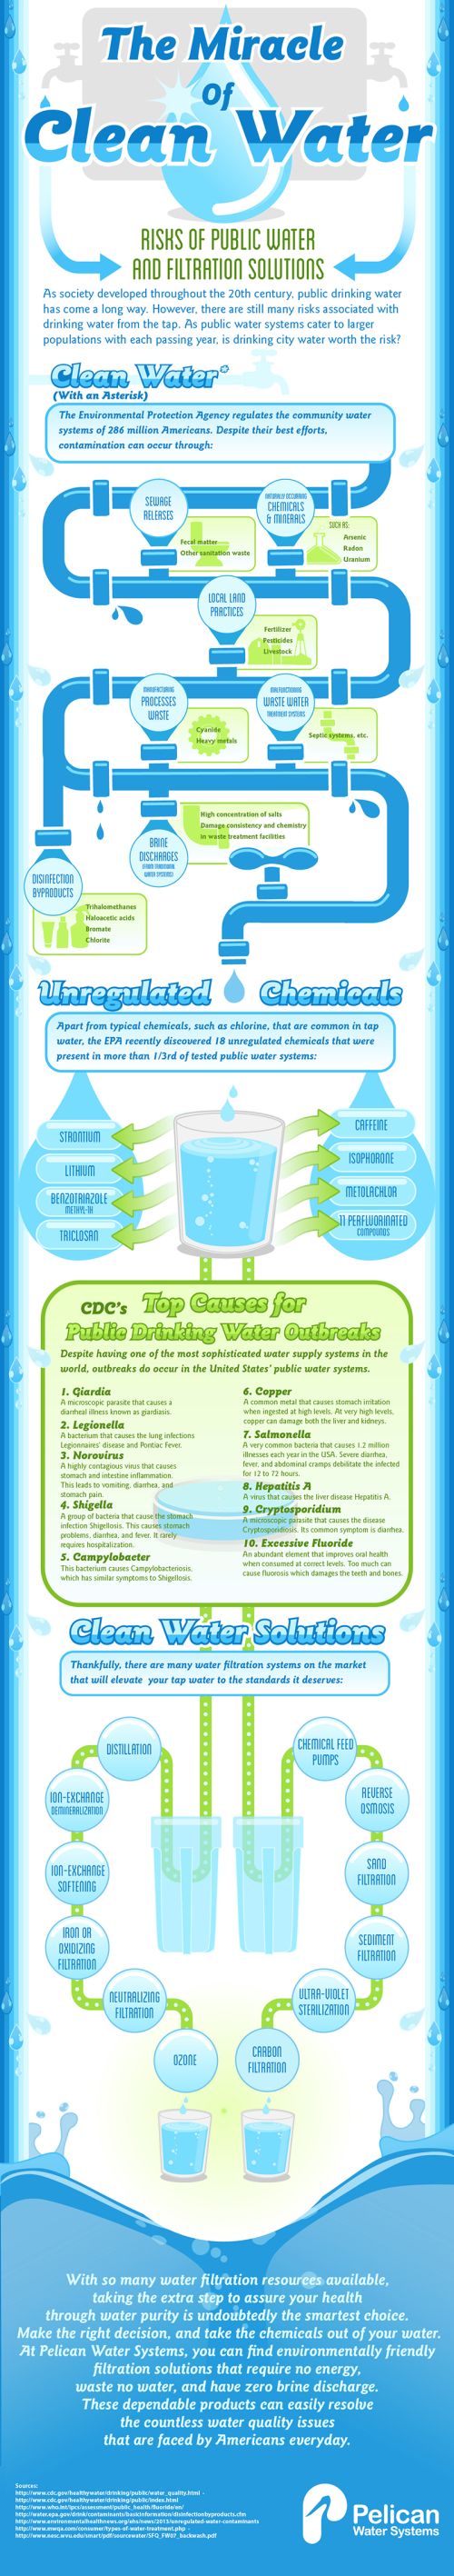 The Miracle of Clean Water Infographic